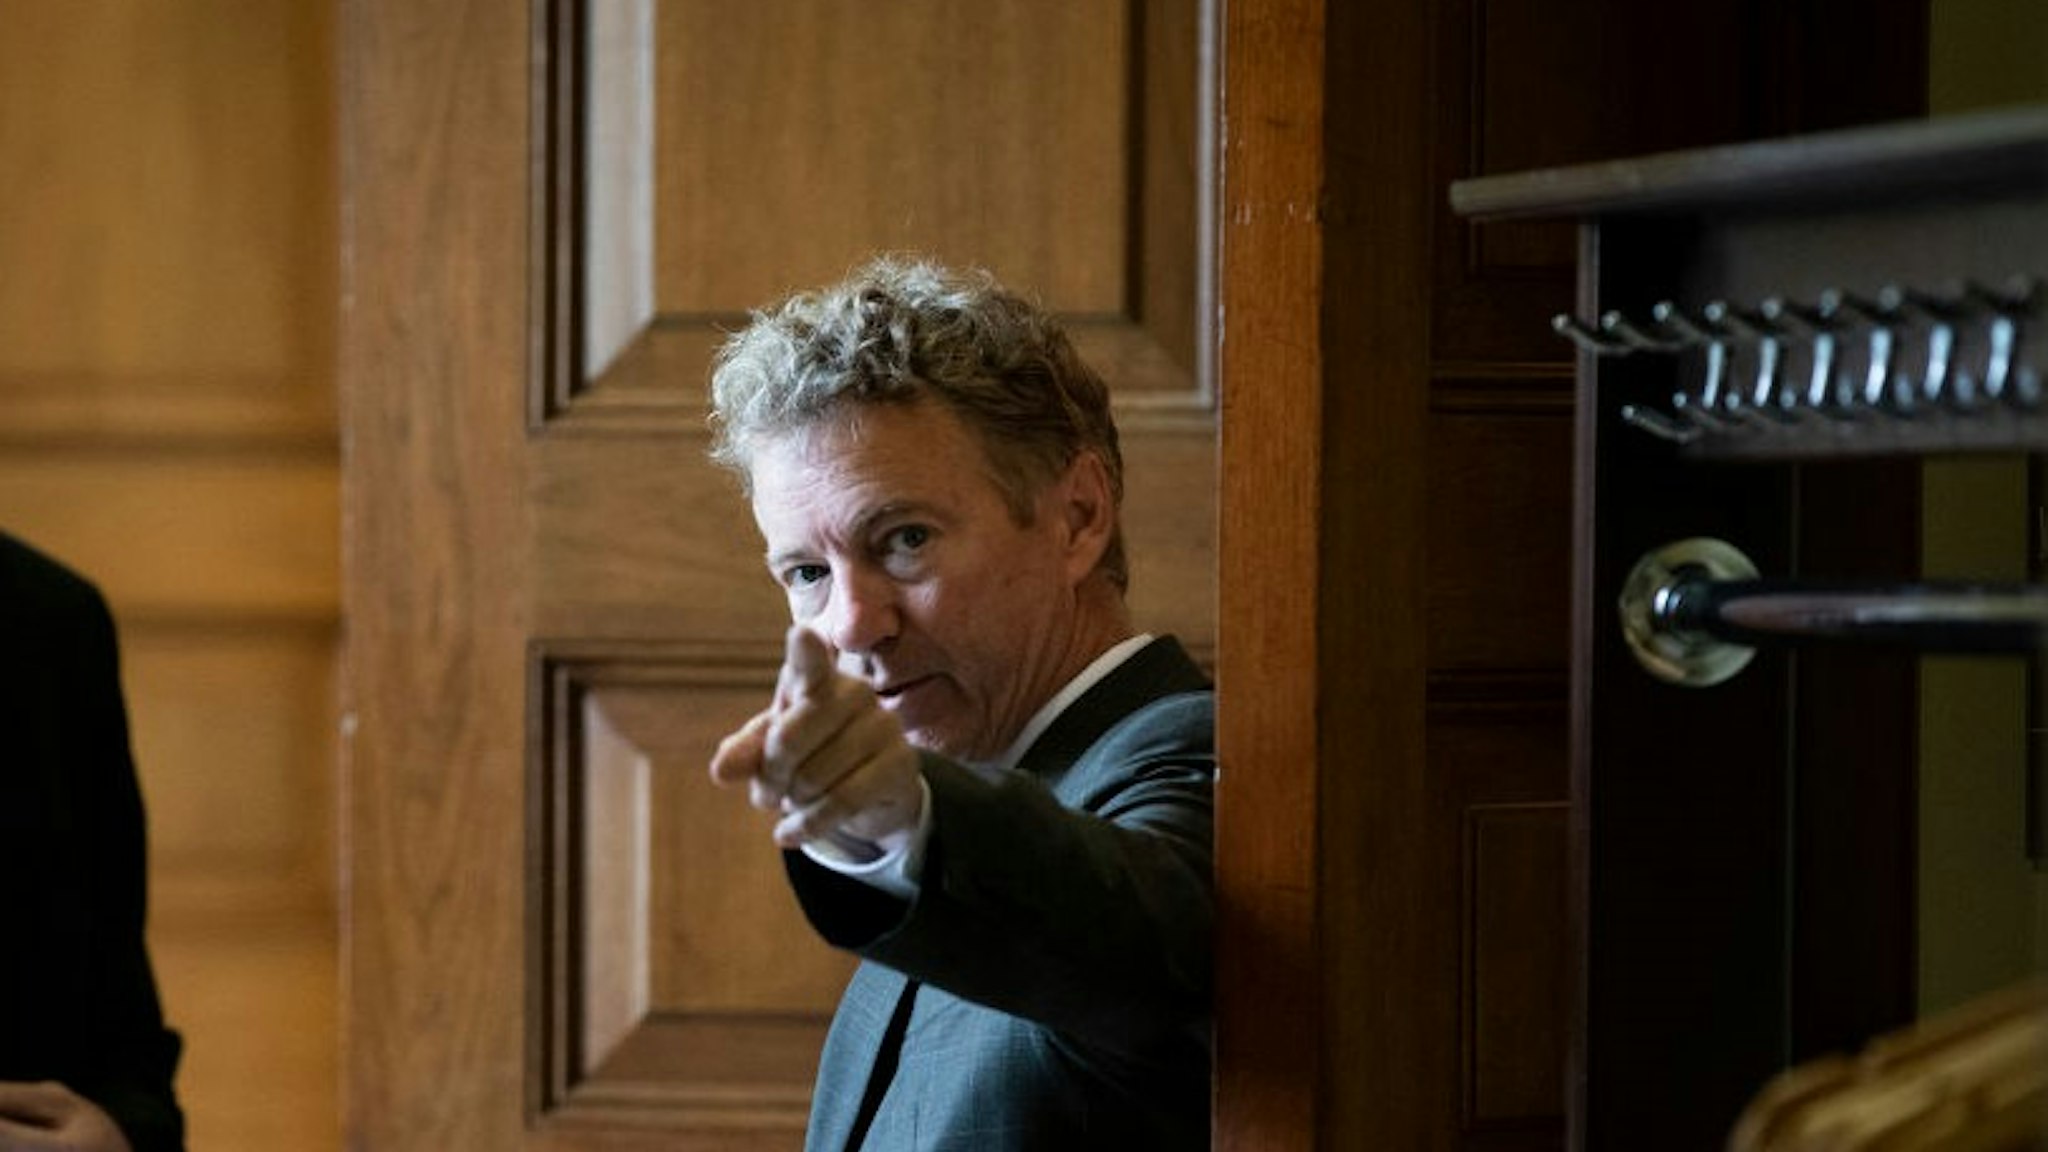 WASHINGTON, DC - SEPTEMBER 25: Sen. Rand Paul (R-KY) arrives for the weekly GOP policy luncheon on Capitol Hill, September 25, 2018 in Washington, DC. Christine Blasey Ford, who has accused Kavanaugh of sexual assault, has agreed to testify before the Senate Judiciary Committee on Thursday. (Photo by